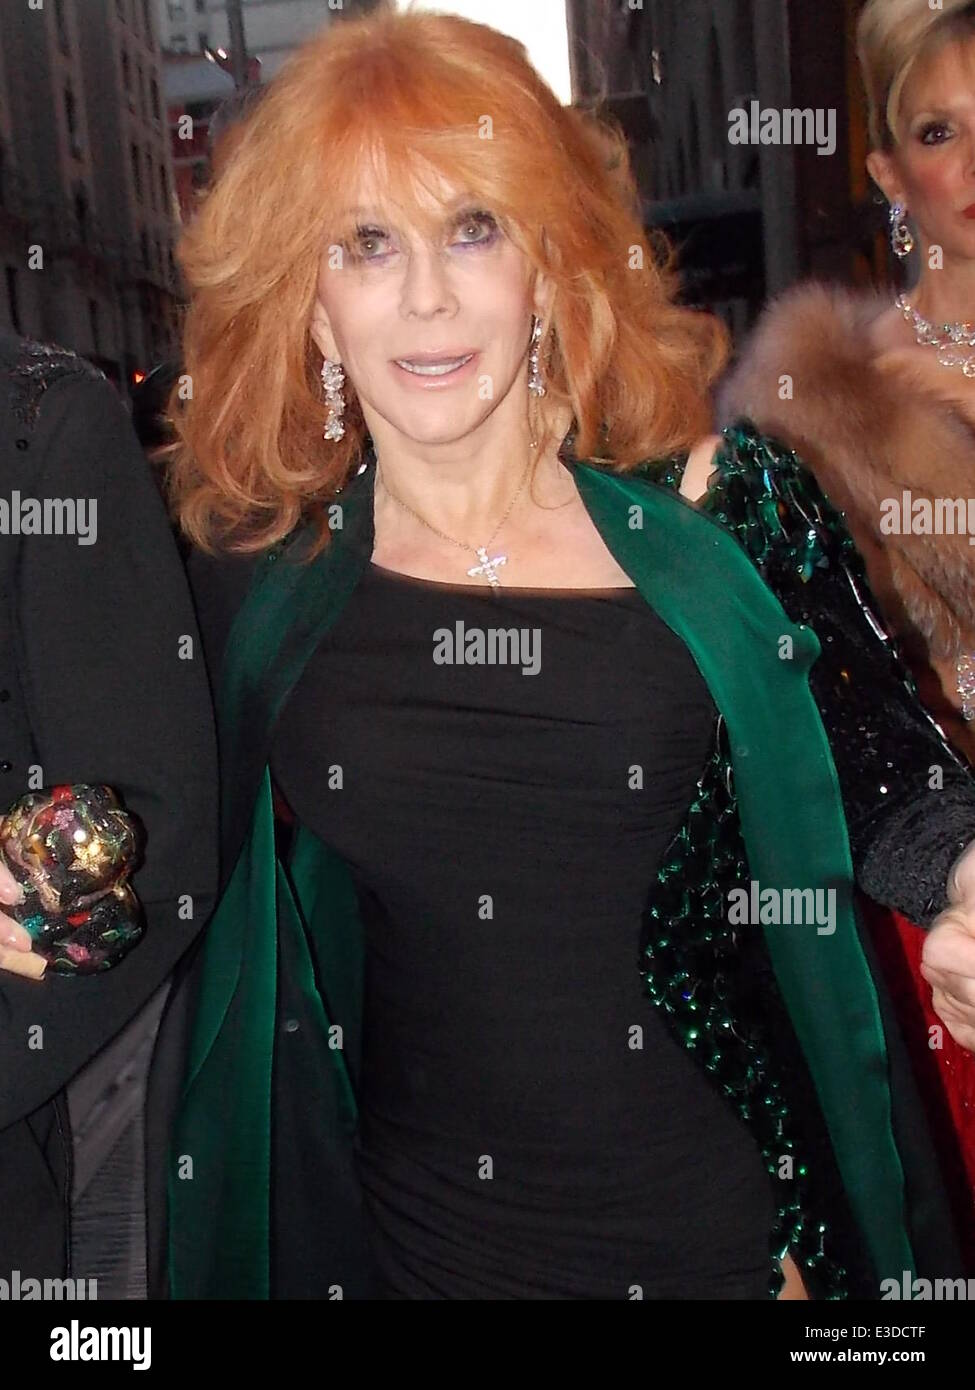 Legendary actress/singer Ann-Margret was honored at the 'Broadway Cares' event at City Center  Featuring: Ann-Margret Where: New York, NY, United States When: 08 Oct 2013 Stock Photo